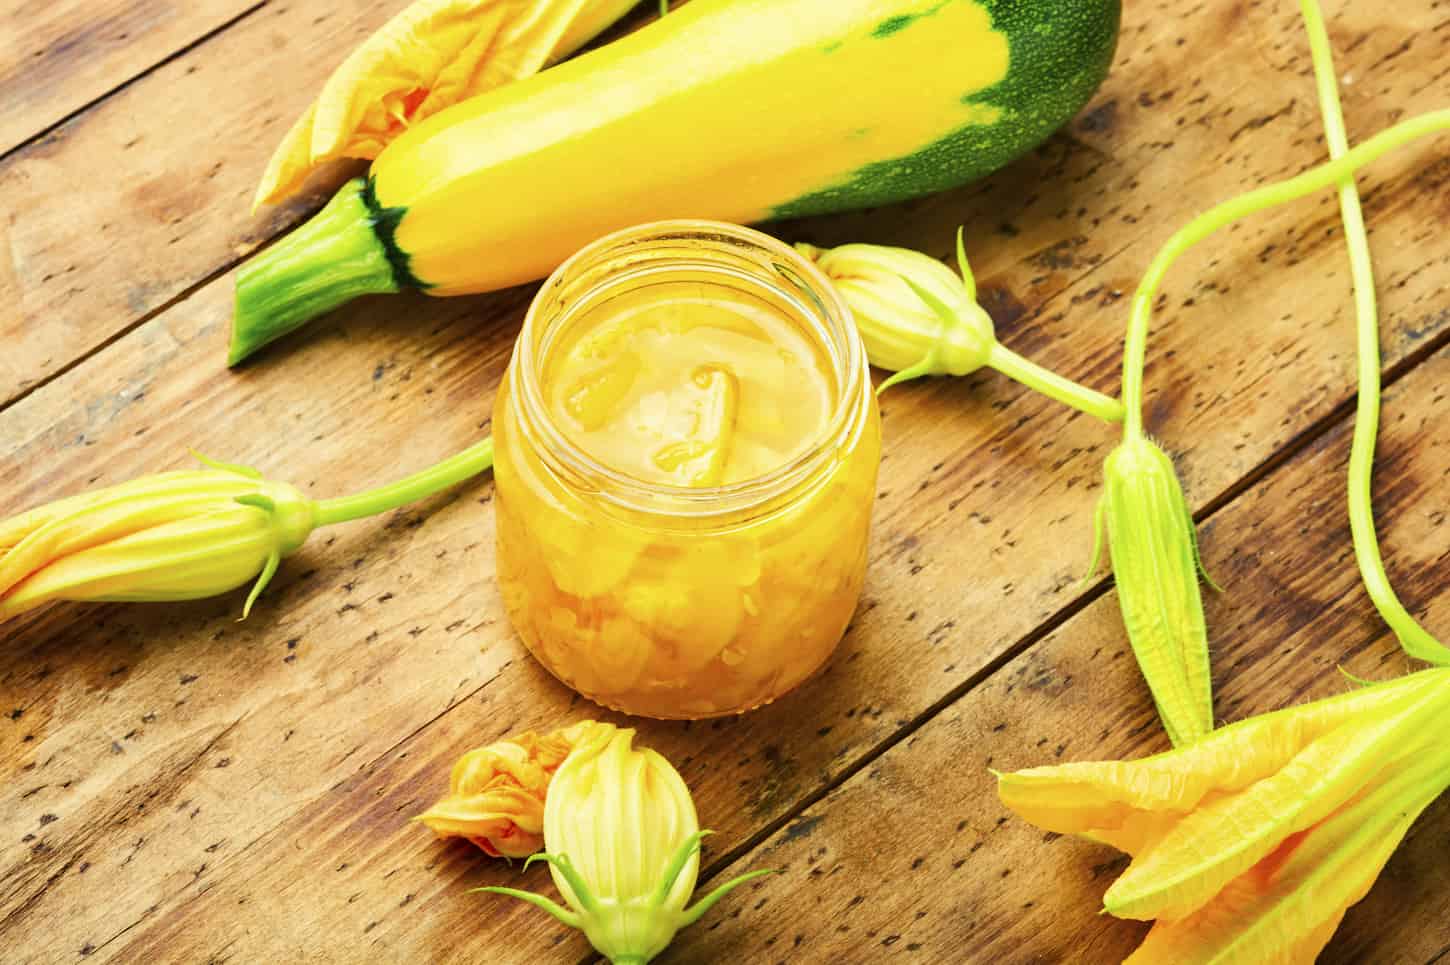 An image of a bottle of zucchini jam, a zucchini turning yellow, and zucchini flowers on a wooden table.